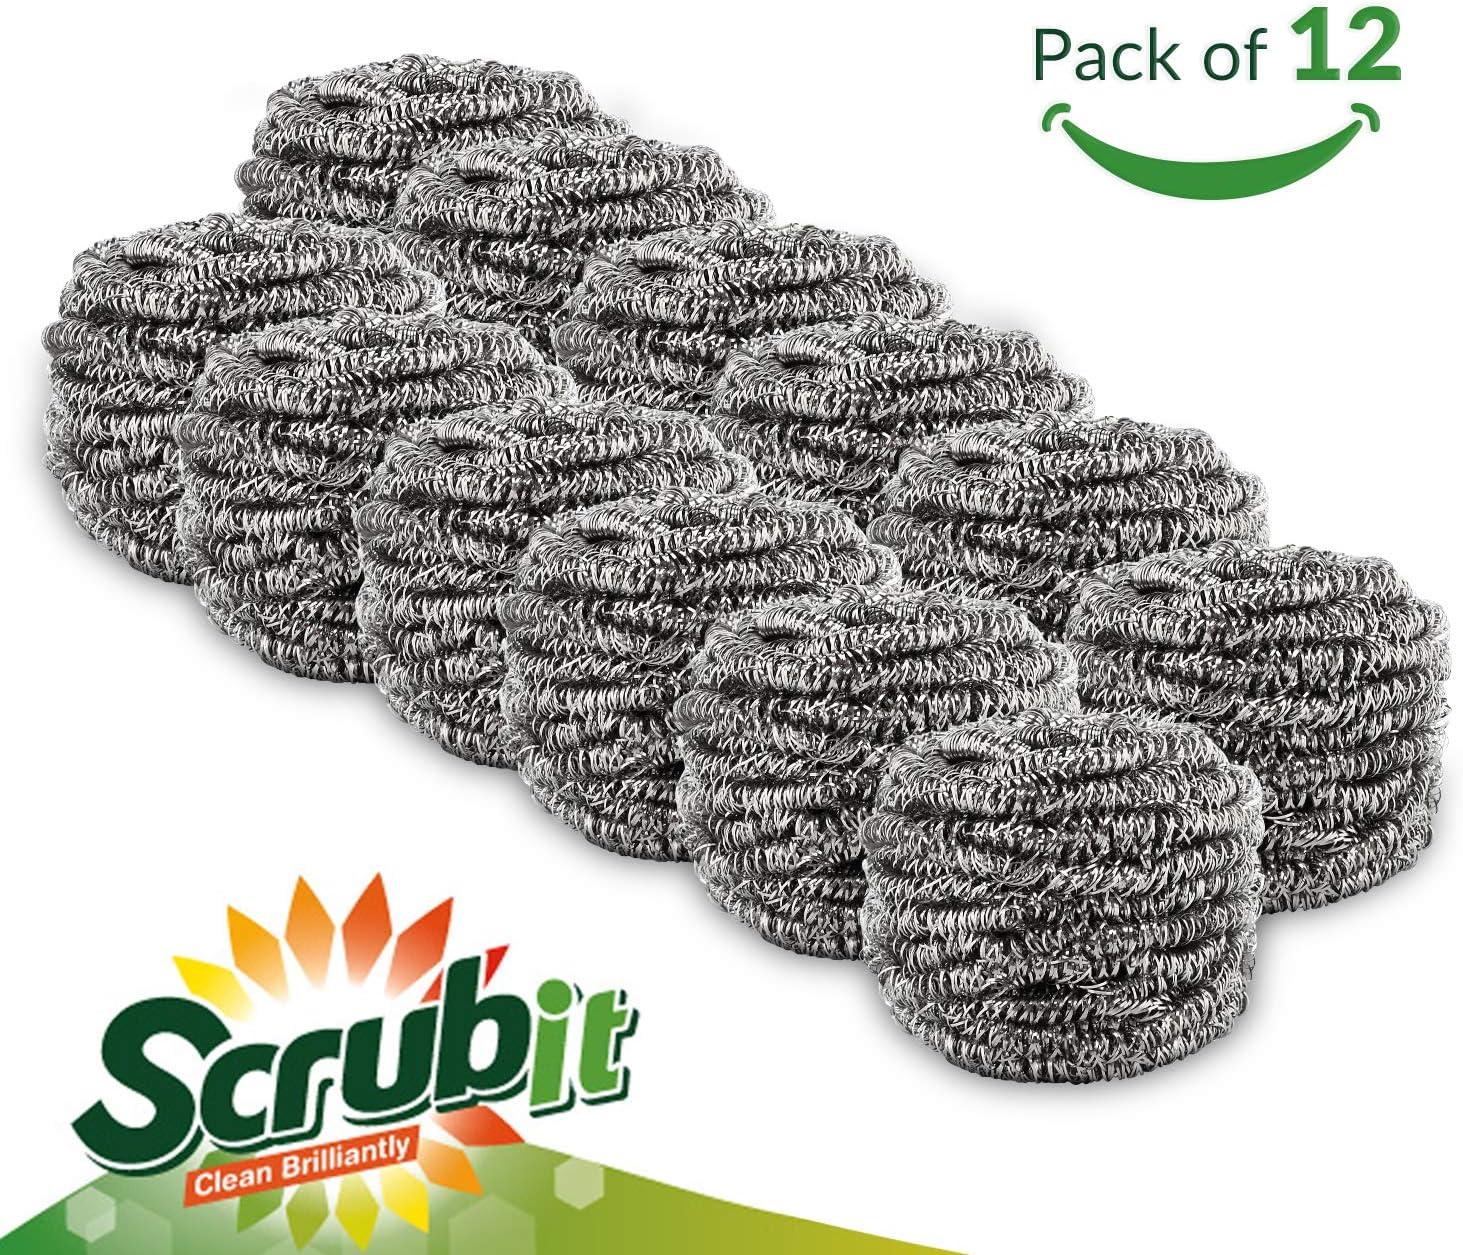 Choice 50g Stainless Steel Scrubber - 12/Pack